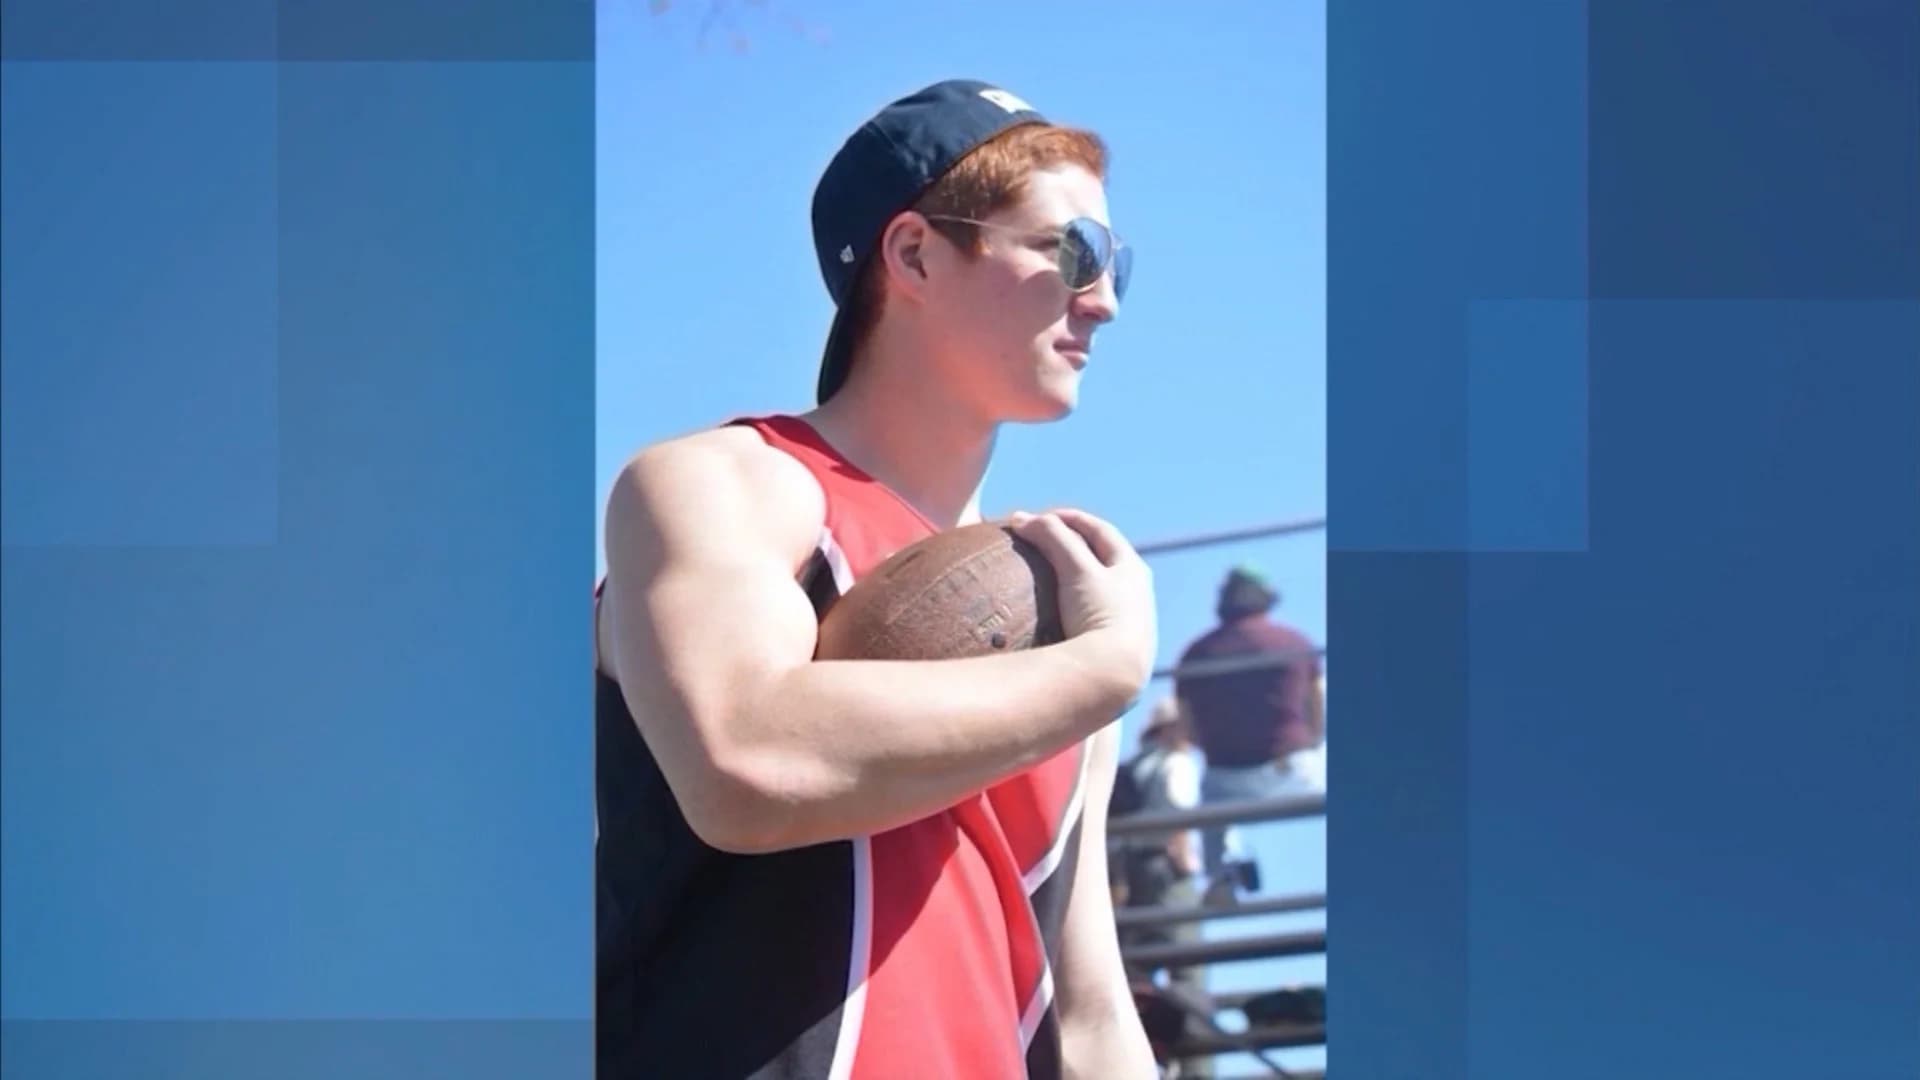 Serious charges dismissed in Penn State frat pledge death